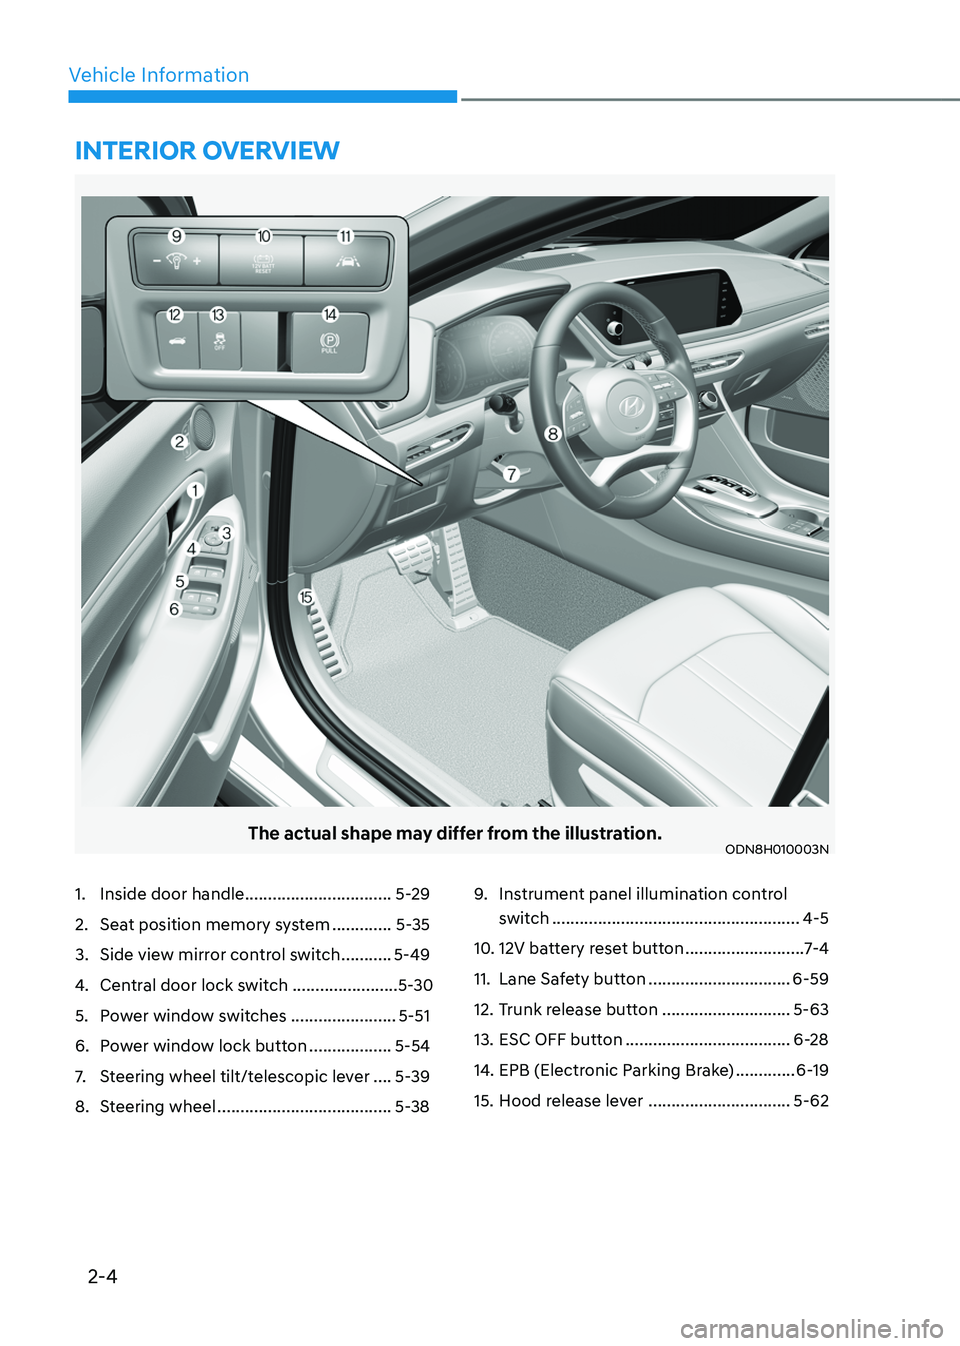 HYUNDAI SONATA HYBRID 2022 Owners Guide 2-4
Vehicle Information
The actual shape may differ from the illustration.ODN8H010003N
1. Inside door handle ................................5-29
2. Seat position memory system .............5-35
3. Si